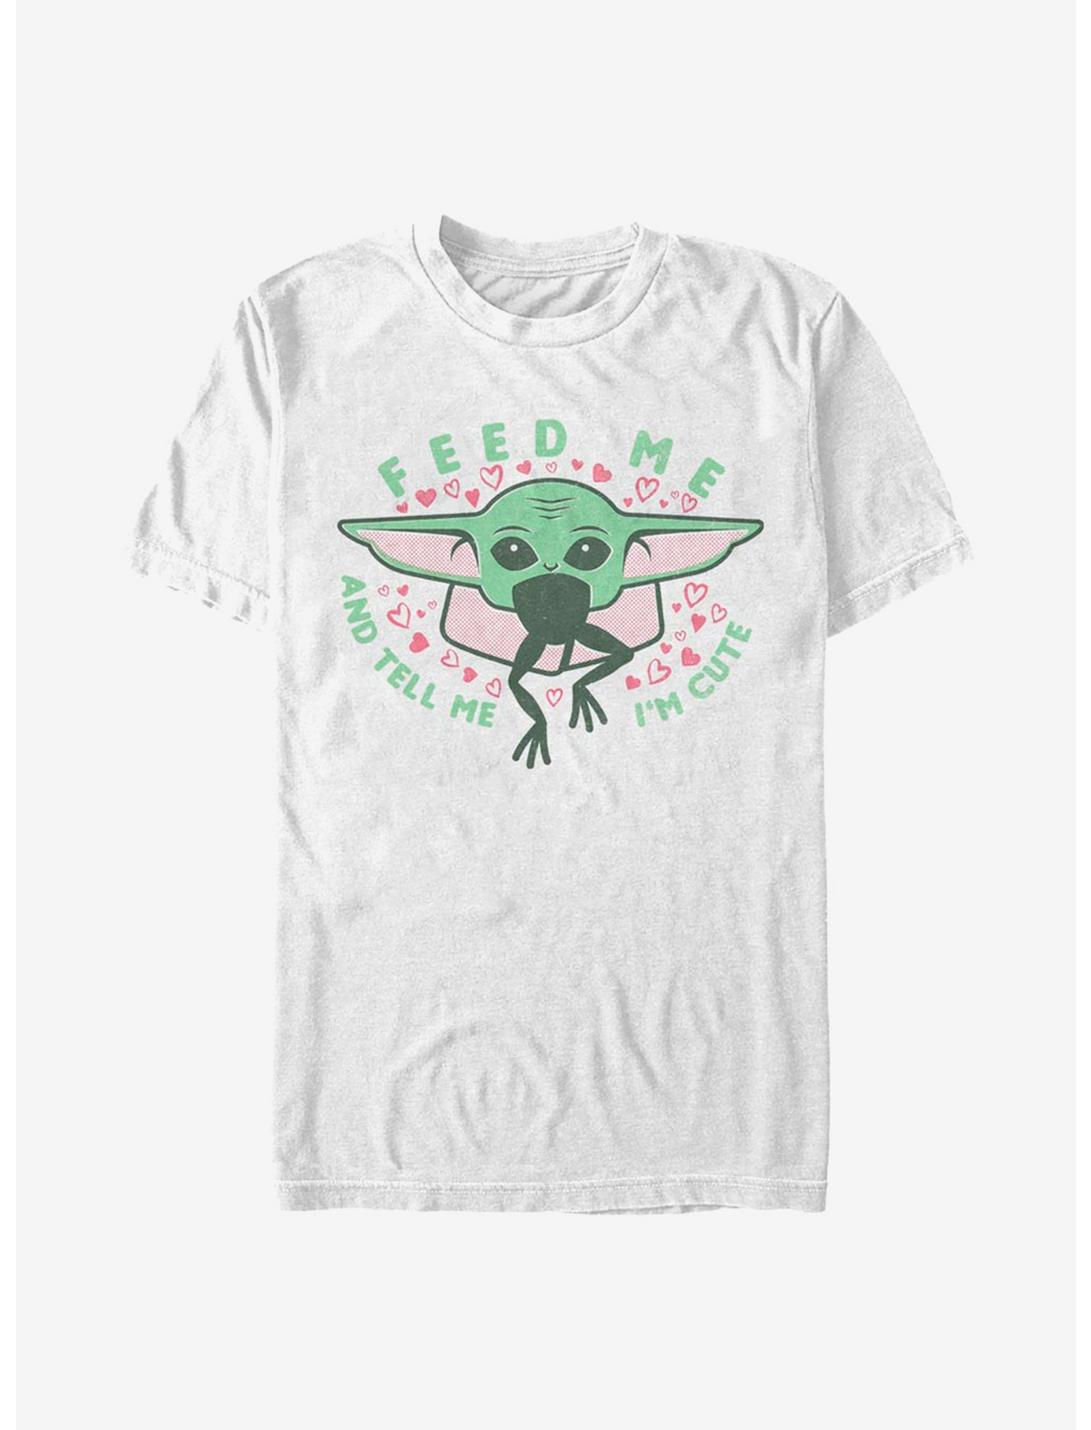 Star Wars The Mandalorian The Child Feed Me And Tell Me I'm Cute T-Shirt, WHITE, hi-res